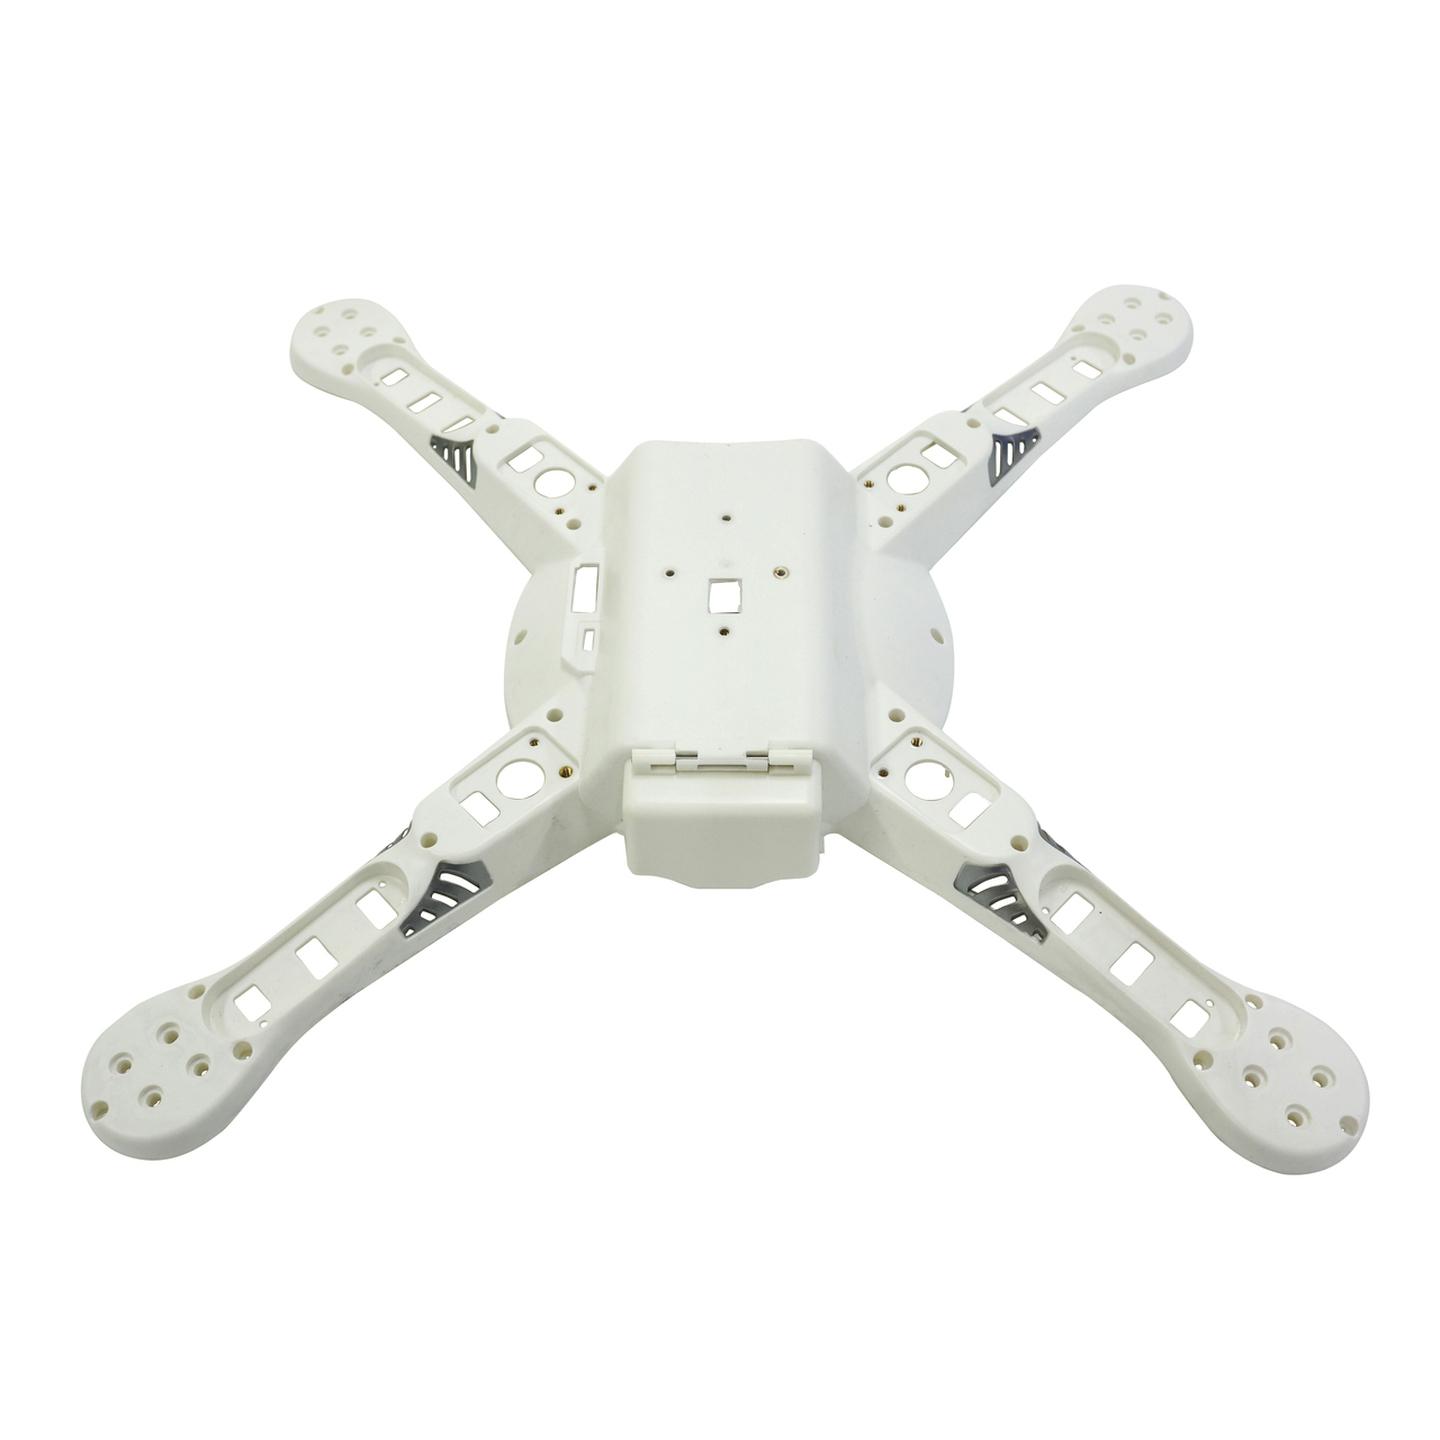 Lower Body Cover to suit GT4040 Quadcopter